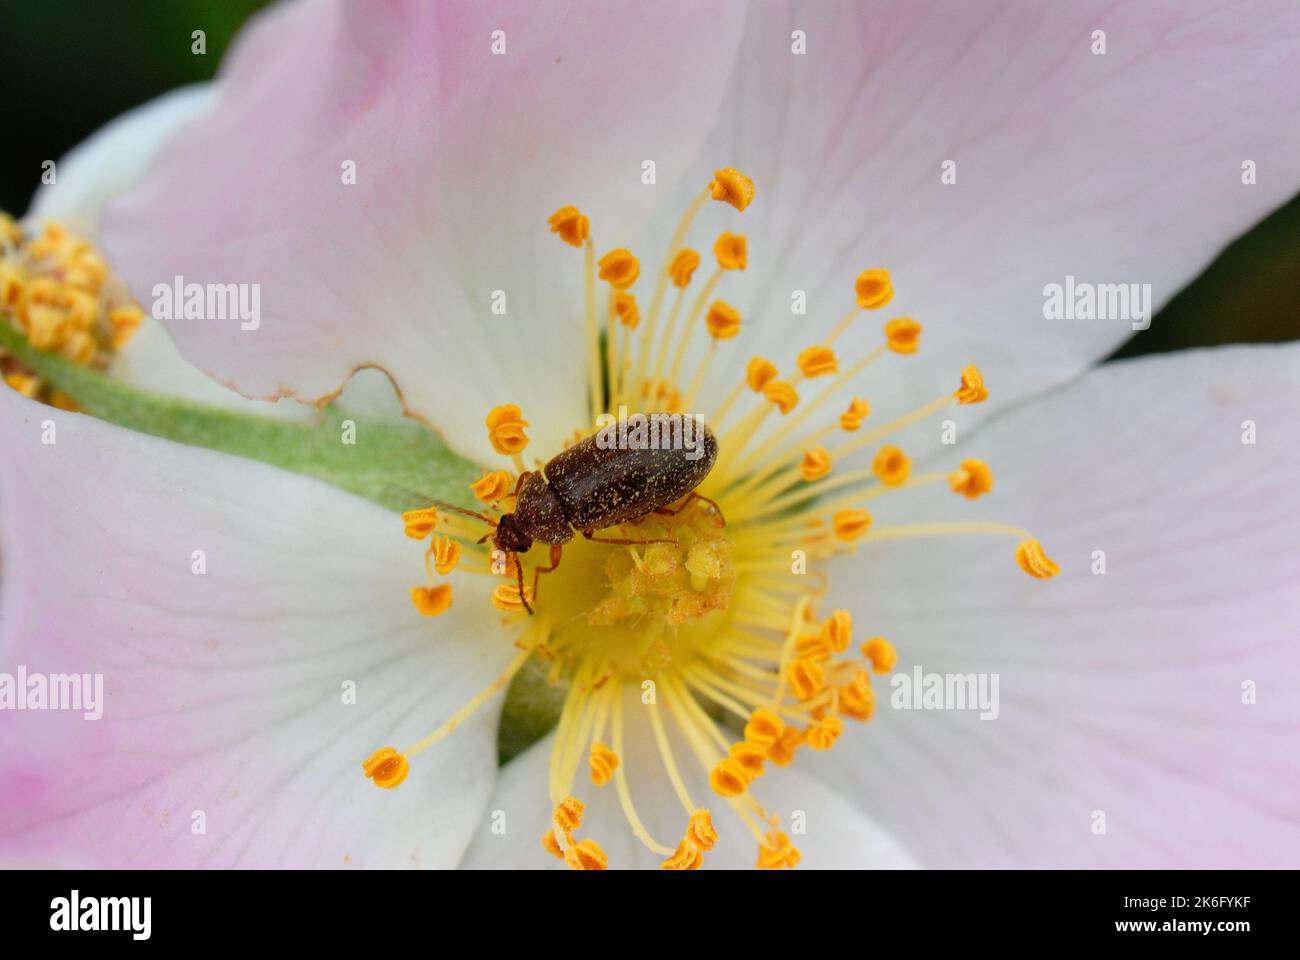 Small black beetle covered in pollen on yellow flower Stock Photo